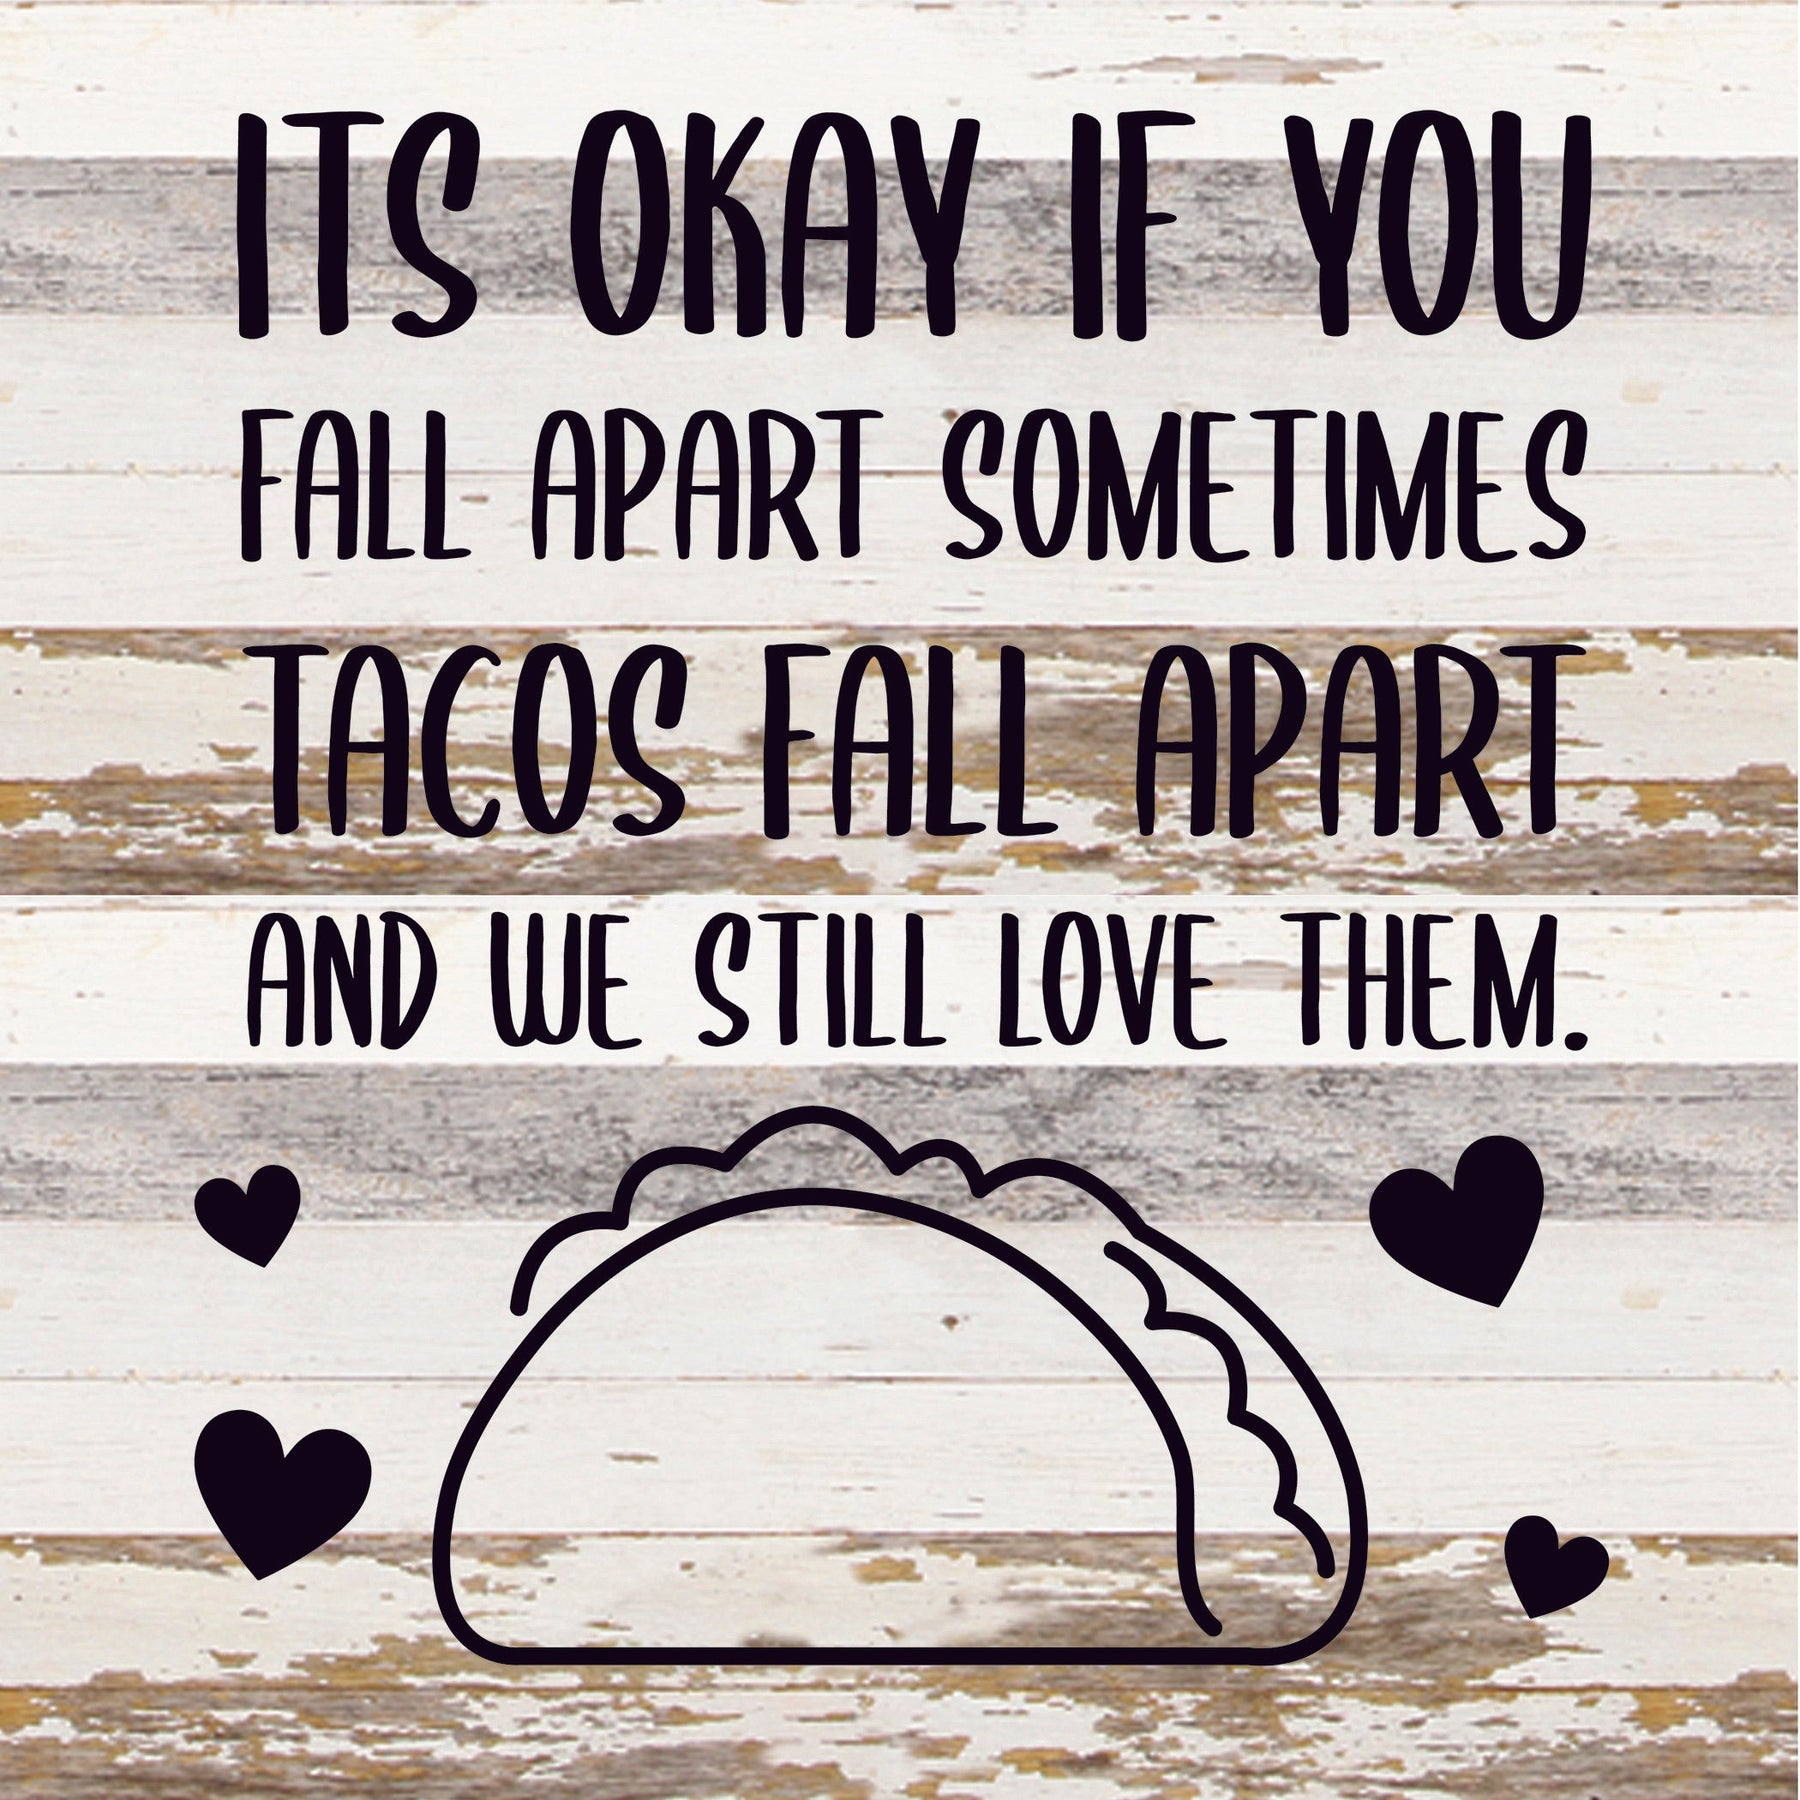 It's ok if you fall apart sometimes... Tacos fall apart and we still love them / 14x14 Reclaimed Wood Sign